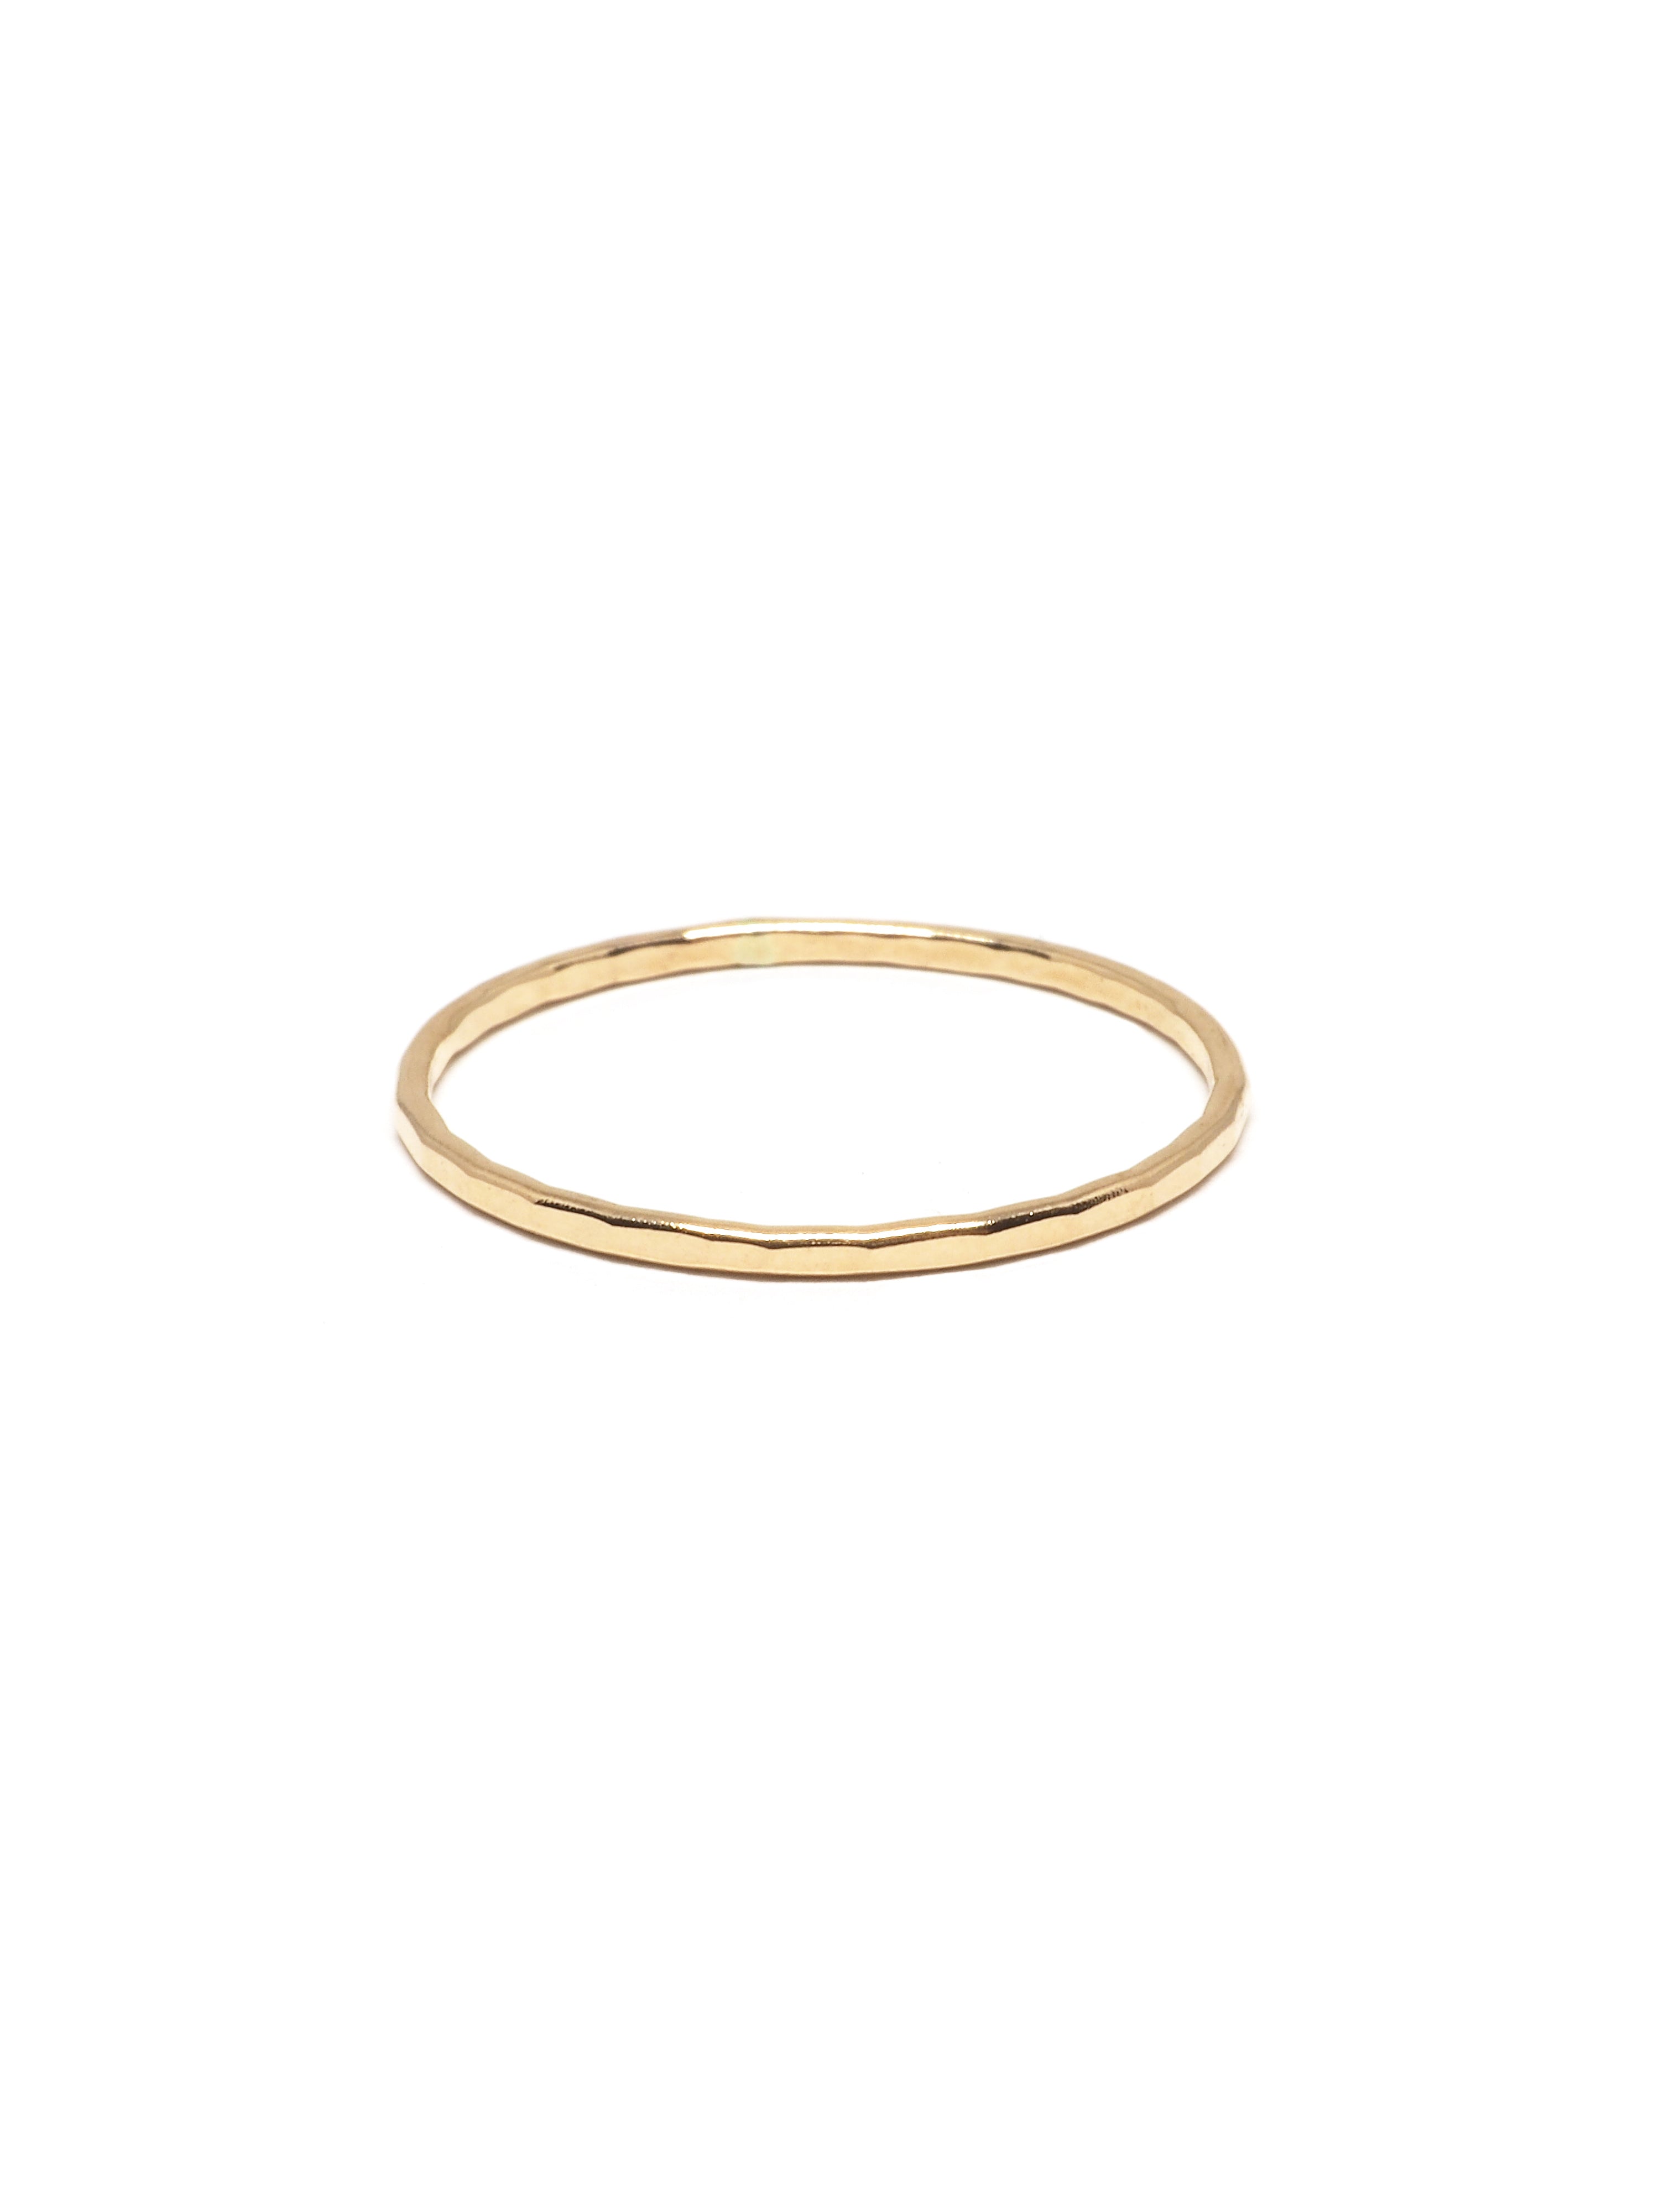 STACKING RING | HAMMERED